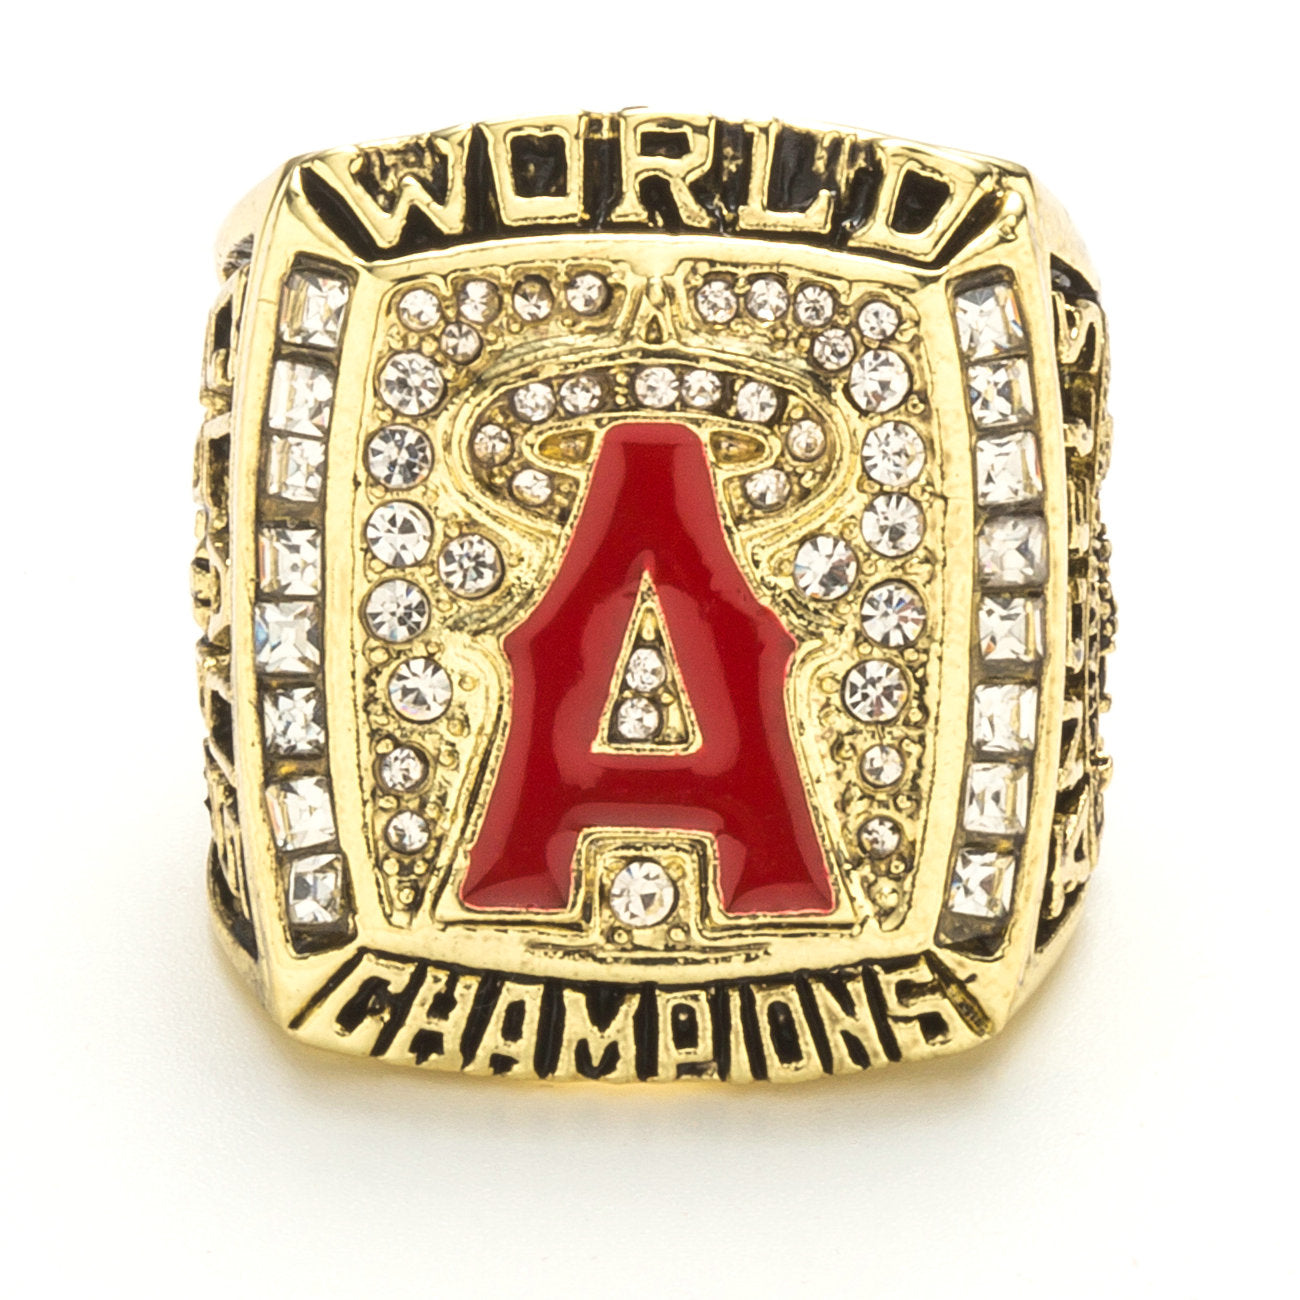 LA Angels - History, Records, Championships, Rings, Owner Details and more.